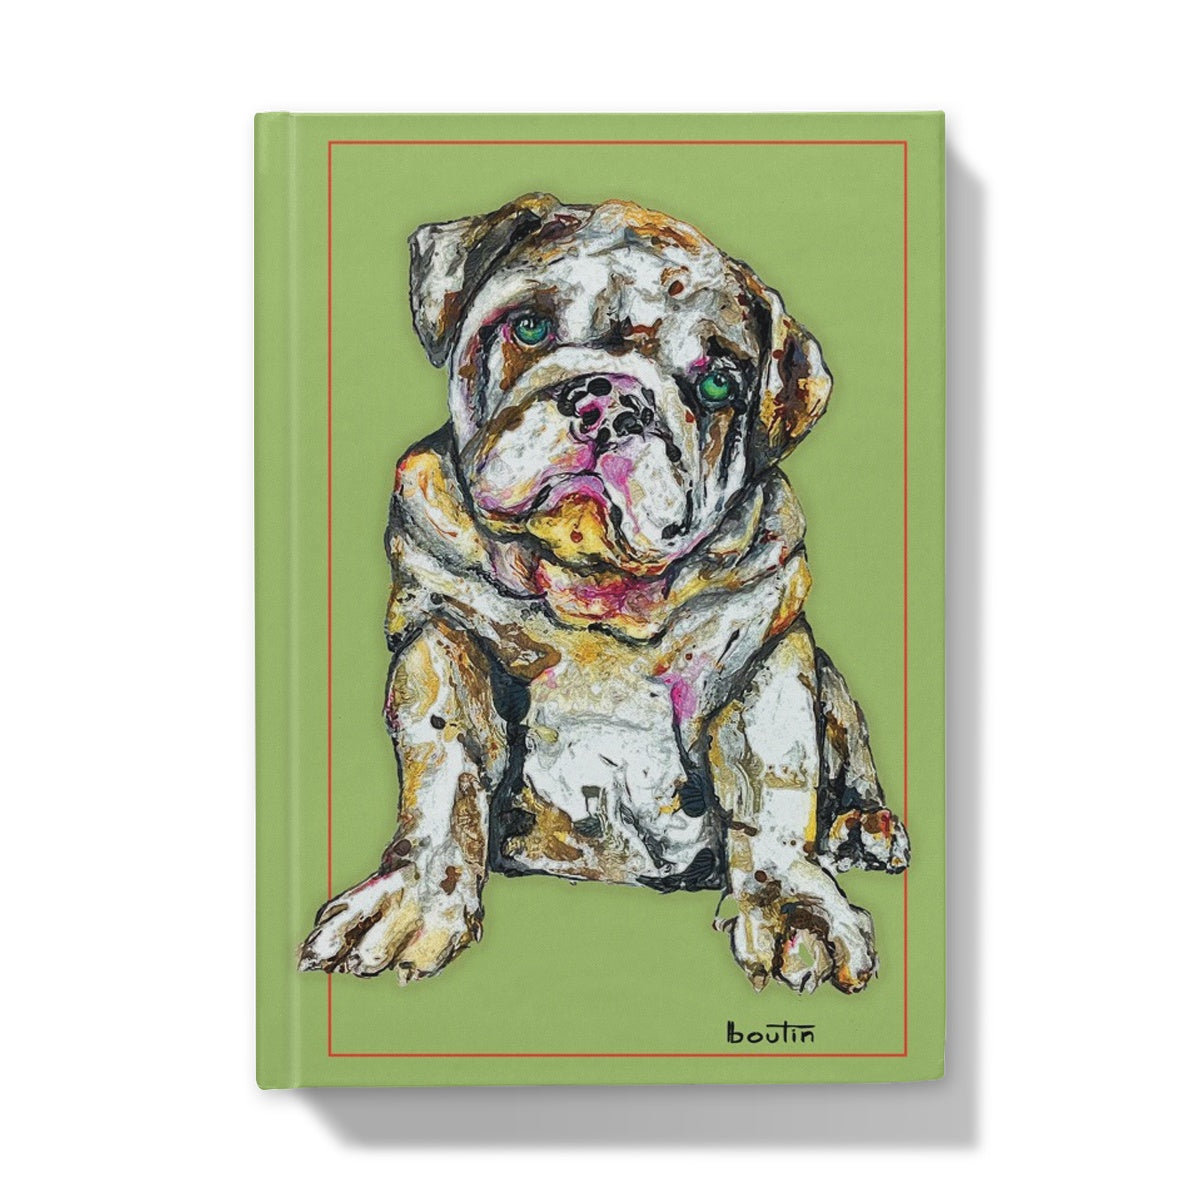 Loulou vert - Notebook by the artist Boutin